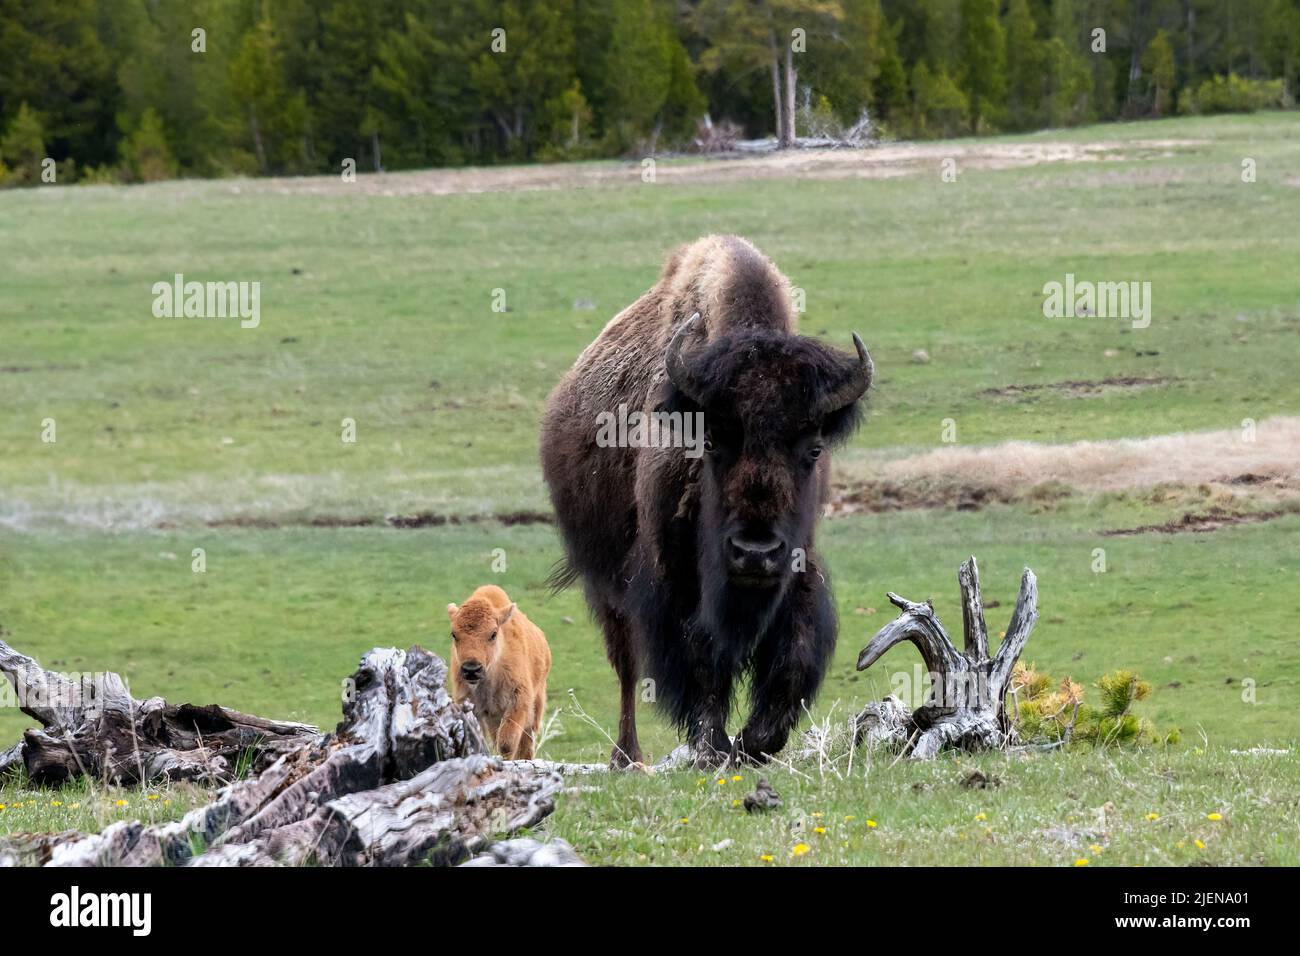 American Bison with Calf in Yellowstone National Park Stock Photo